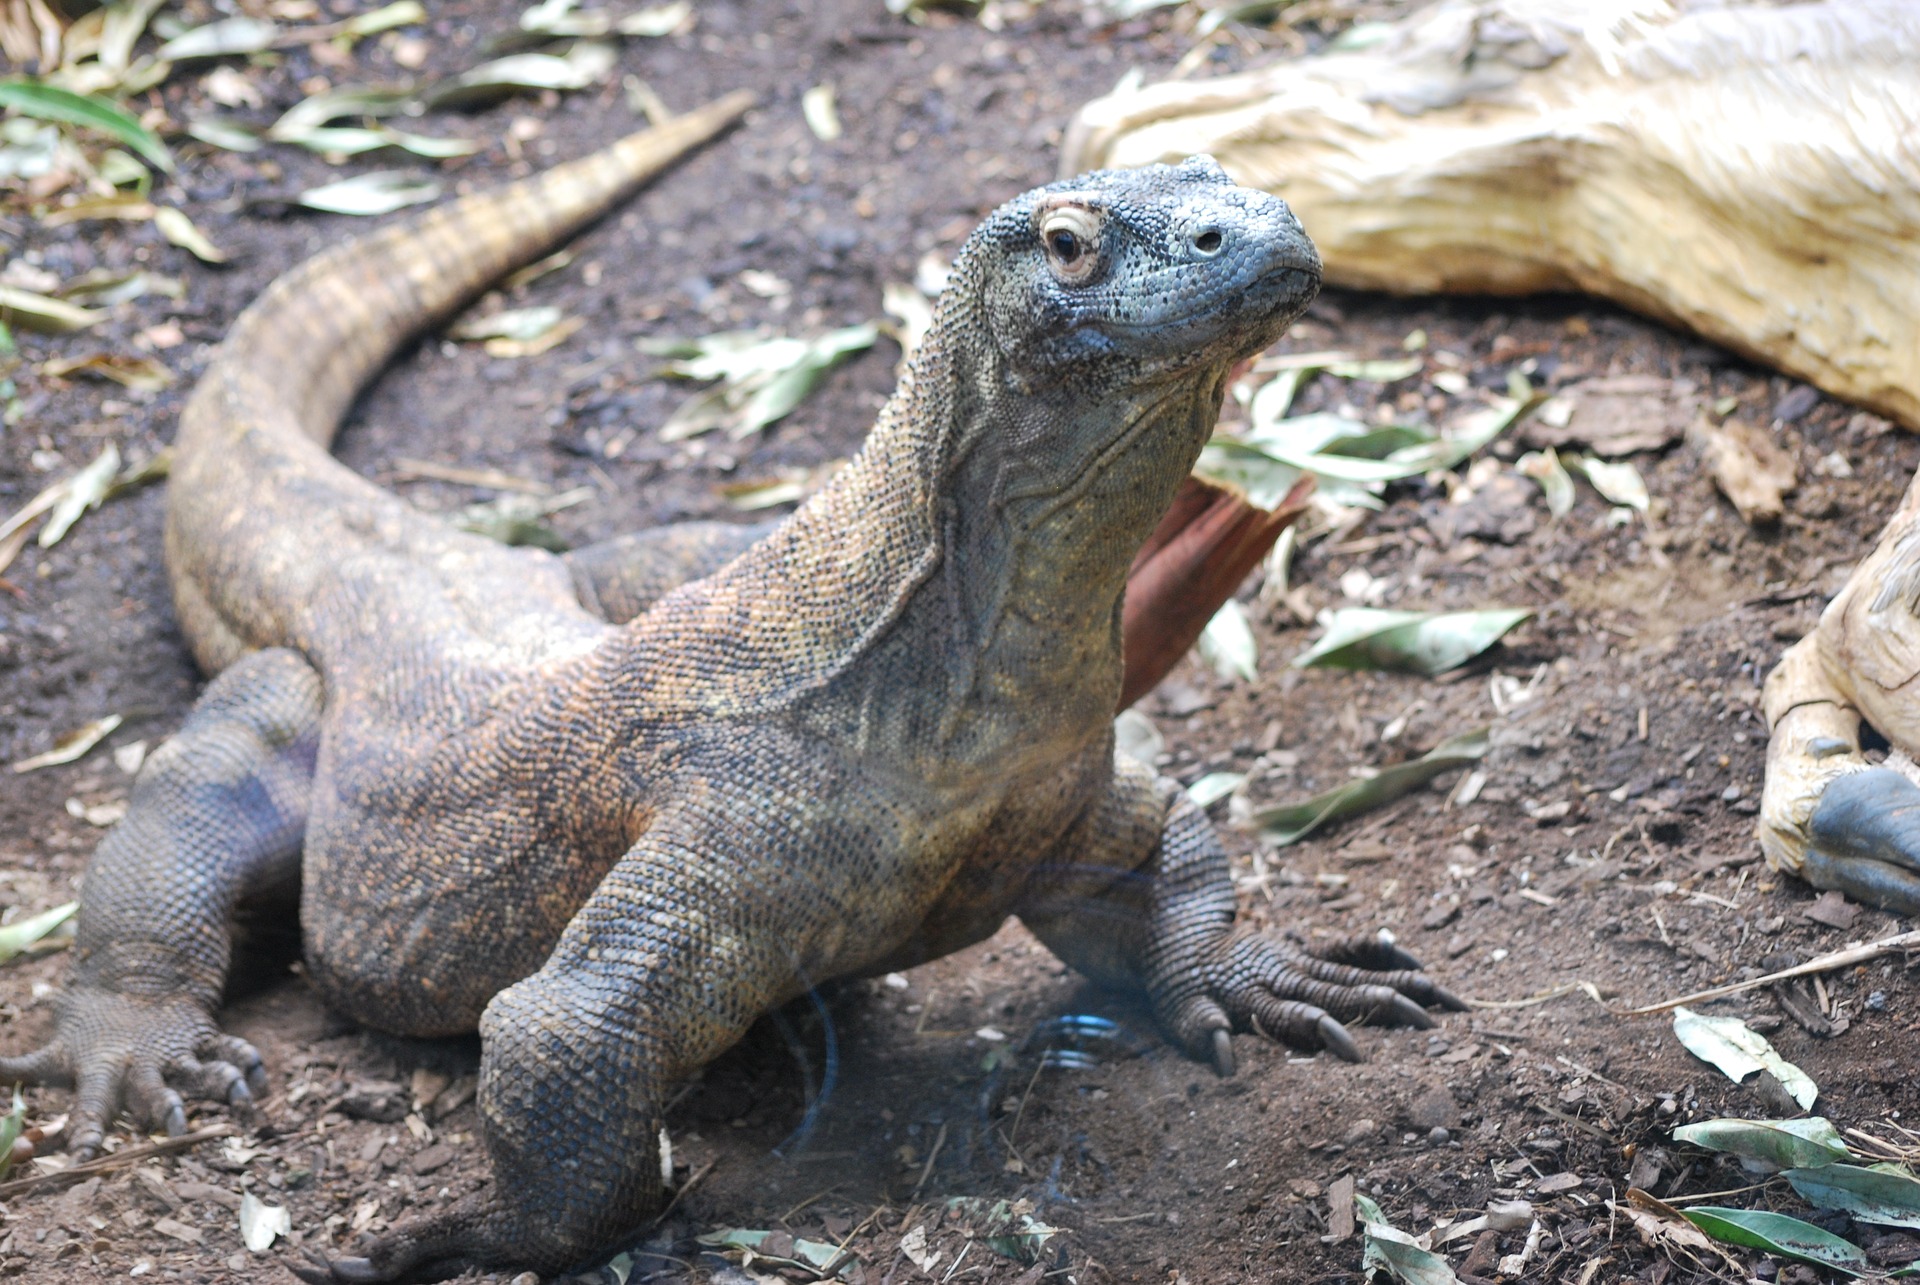 Image: Komodo Dragon blood contains powerful self-produced antibiotics, turning the reptile into a walking pharmacy